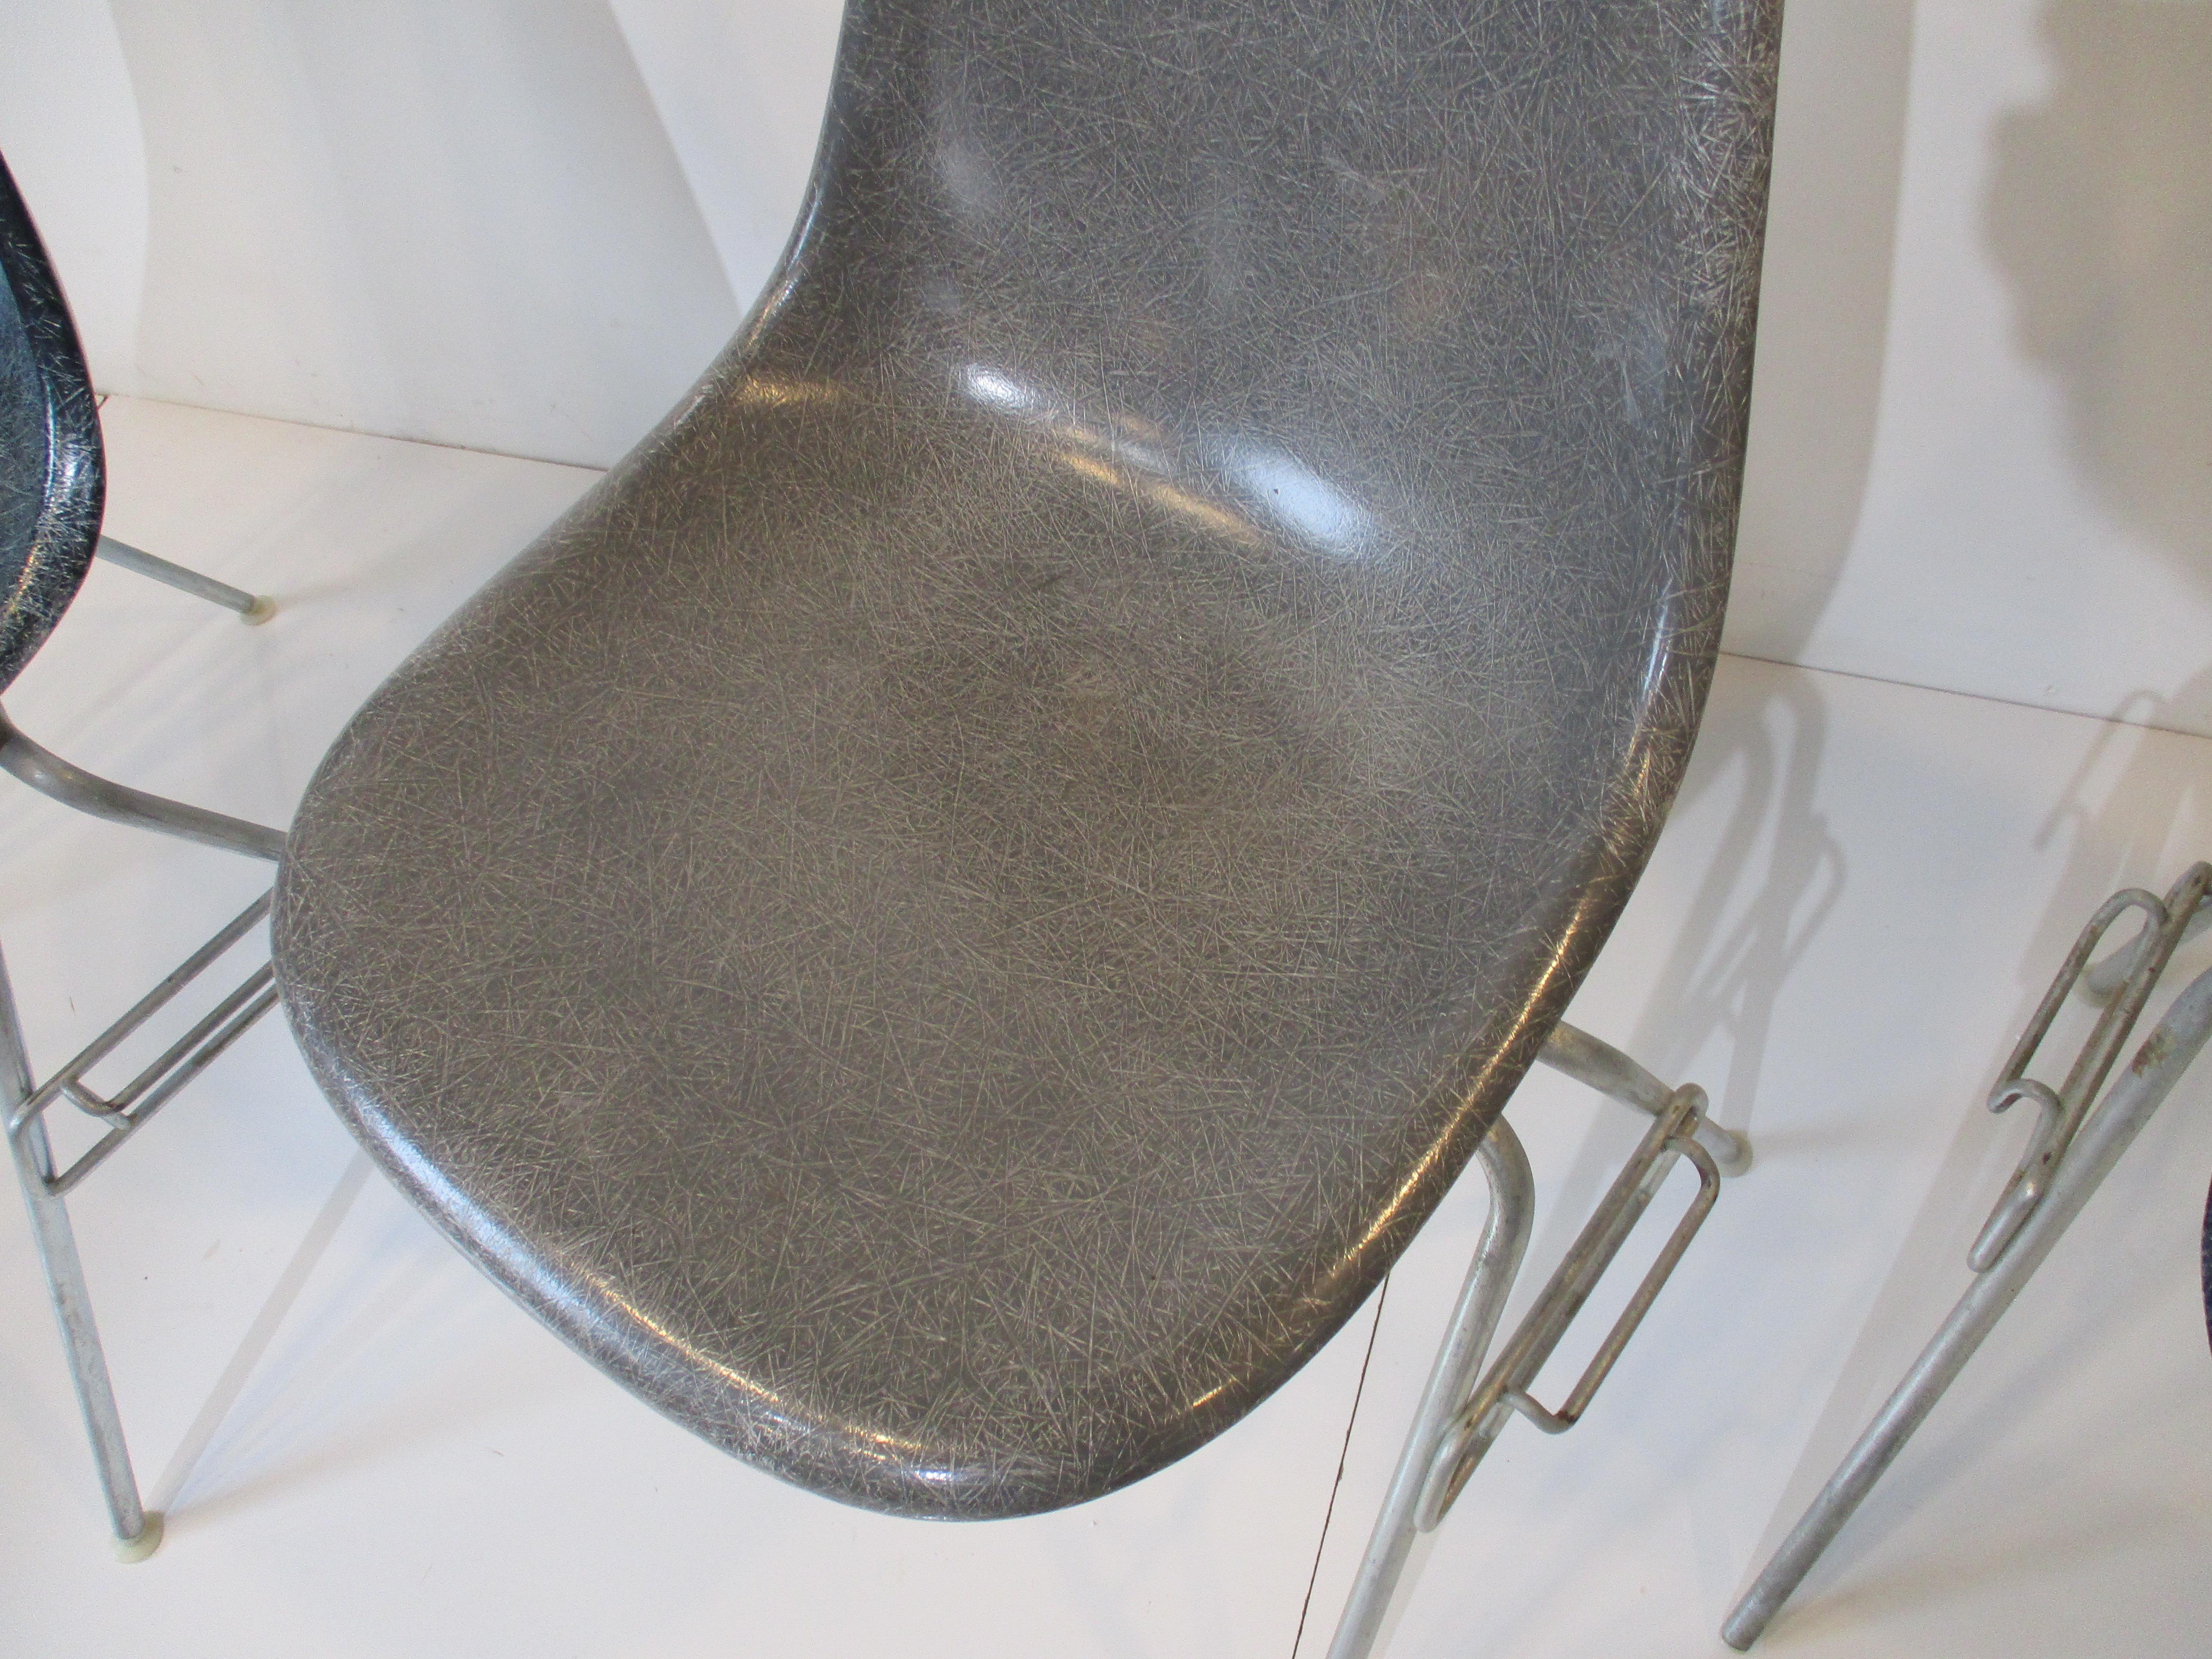 Eames Stacking DSS Side Shell Chairs for Herman Miller In Good Condition In Cincinnati, OH